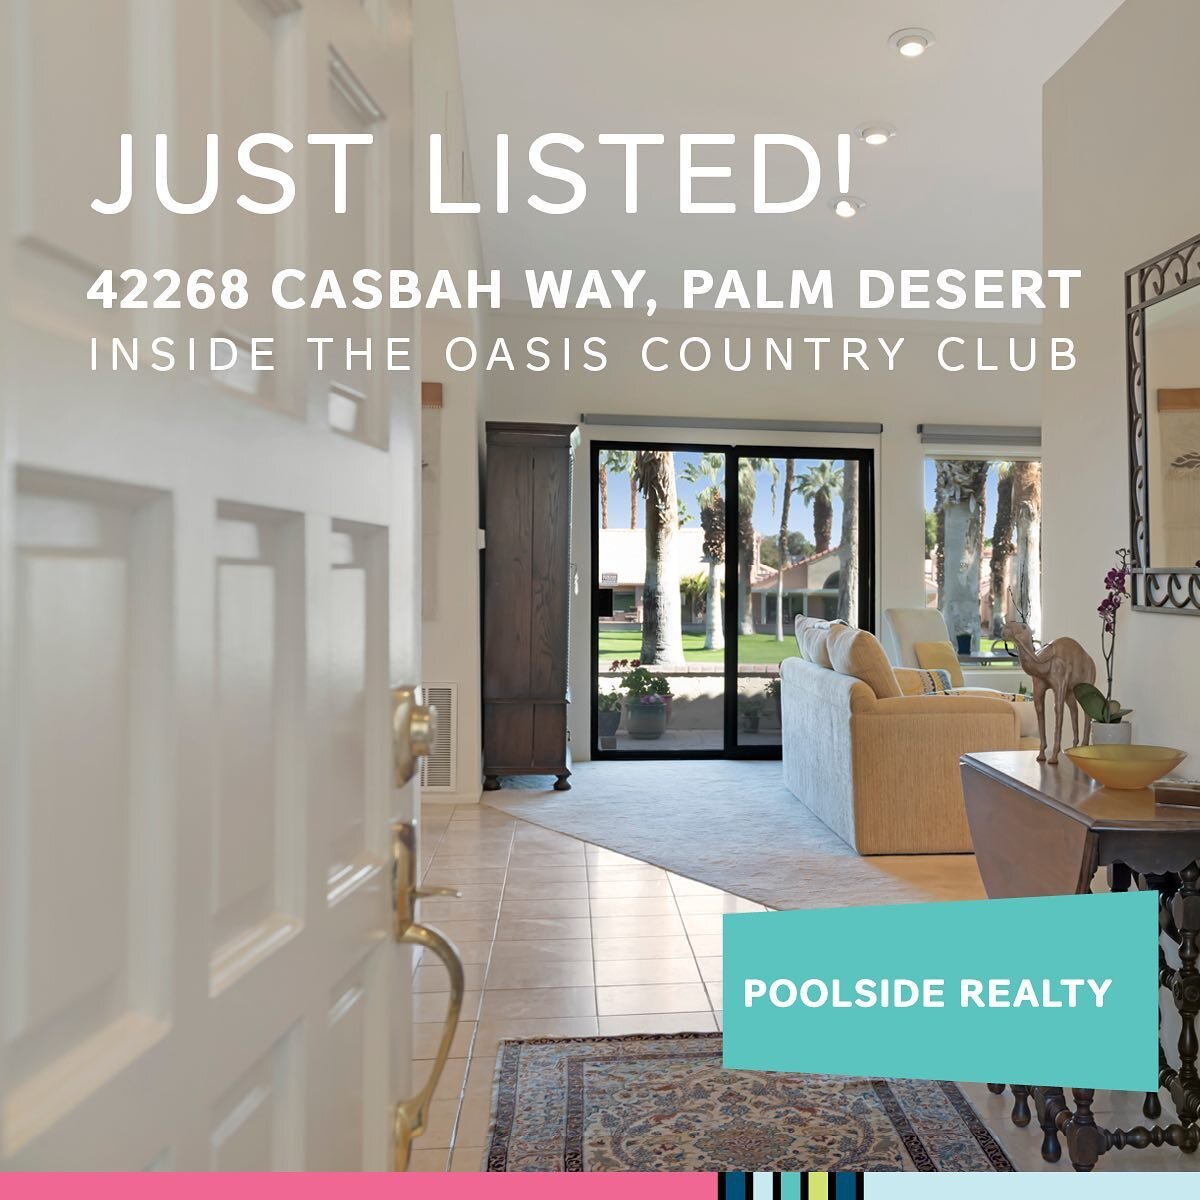 Desert Oasis condo&hellip;2 🛌, 2 🛀🏾 and stunning views of the 10th hole, water, and mountains. $364k.
.
📍42268 Casbah Way, Palm Desert, The Oasis Country Club.
📸 @ddinatale710 .
.
#palmdesert #oasiscountryclub #theoasiscountryclub #desertstyle #